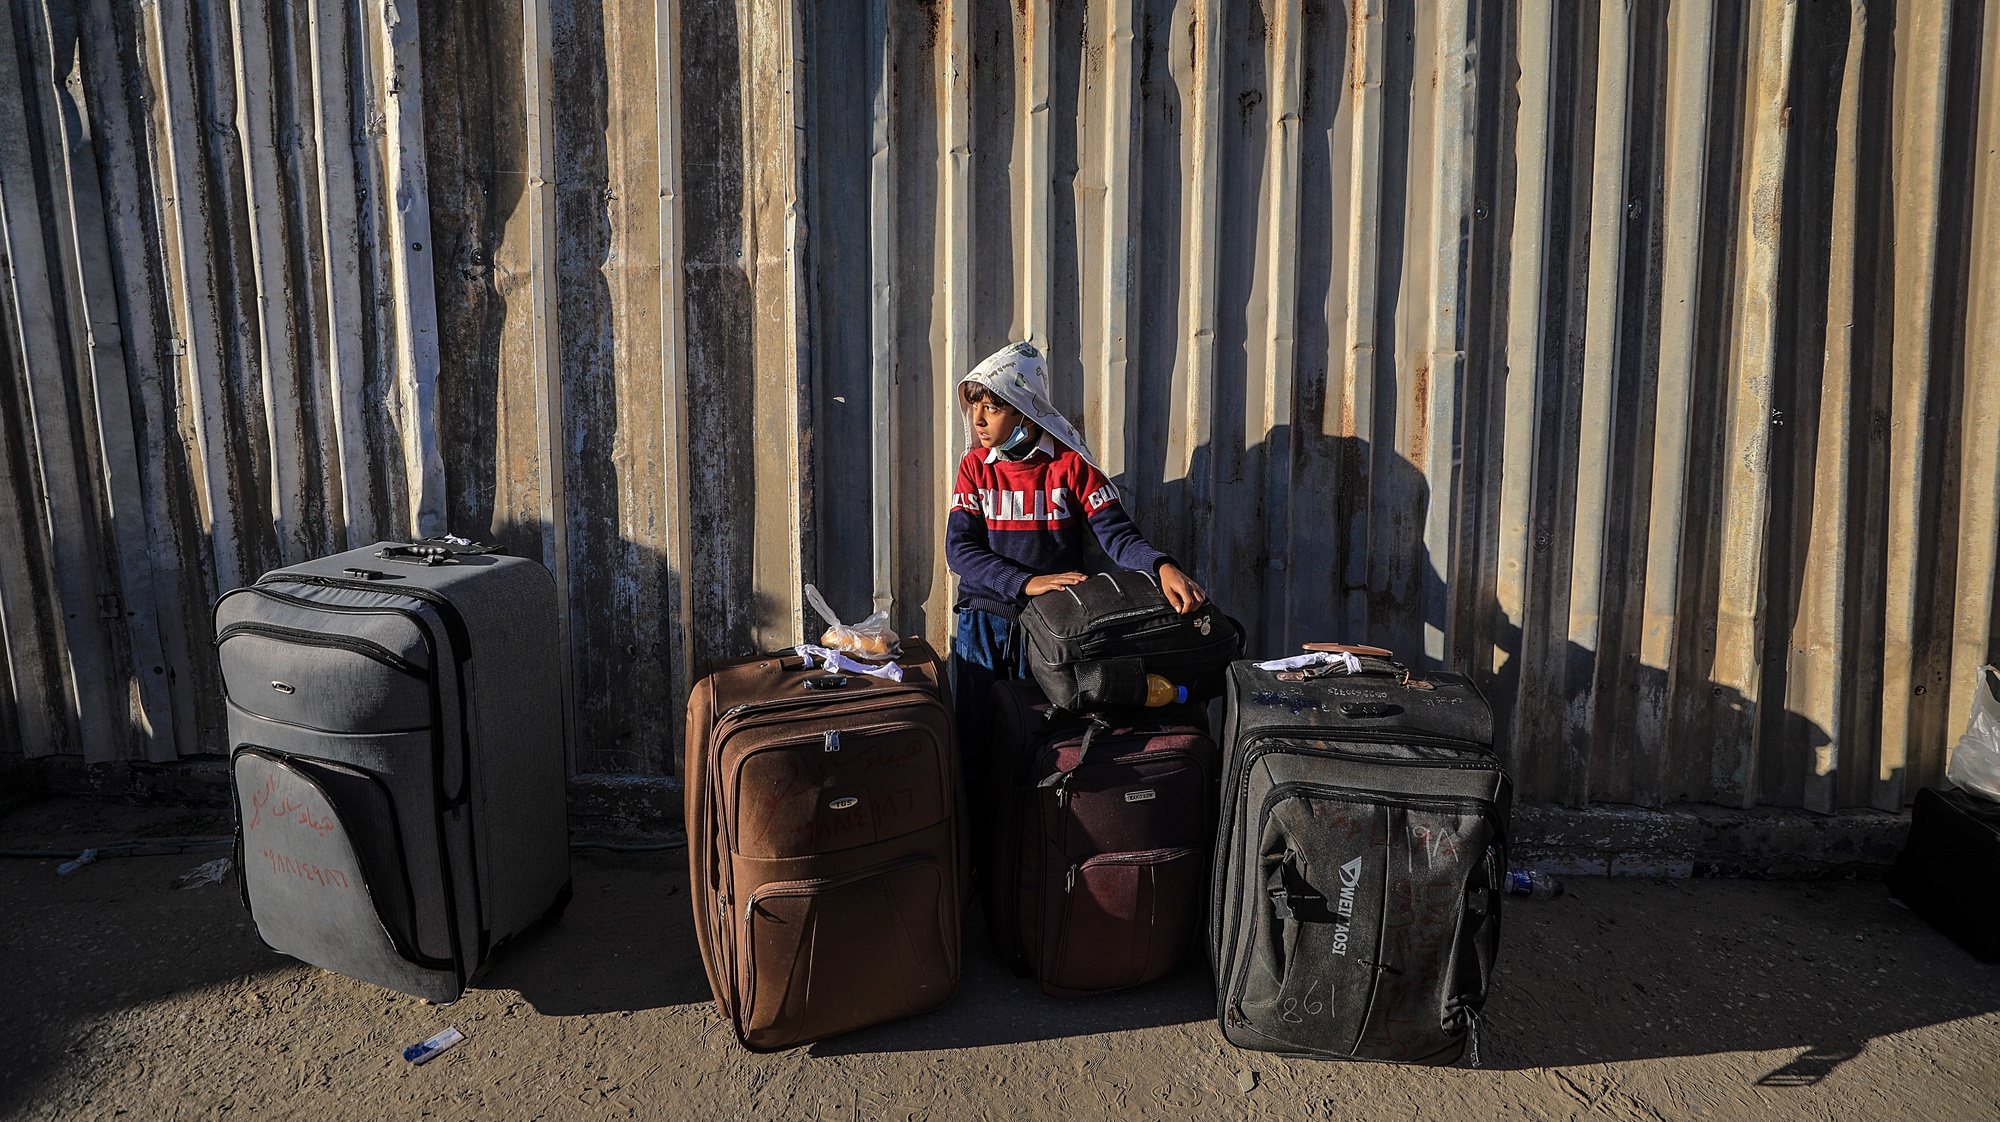 epa08980244 A Palestinian boy waits with his family to cross into Egypt through the Rafah border crossing between Gaza Strip and Egypt after its closure from March 2020 as a precautionary measure against the spread of the coronavirus disease (COVID-19) pandemic, in Rafah, southern Gaza Strip, 01 February 2020. Egyptian Authorities reopened Rafah crossing for four days for the Fifth time since March 2020 for humanitarian cases, including the allowance of crossing the border for people needing medical treatment unavailable in Gaza as well as students enrolled at Egyptian universities and Gazans with jobs abroad.  EPA/MOHAMMED SABER